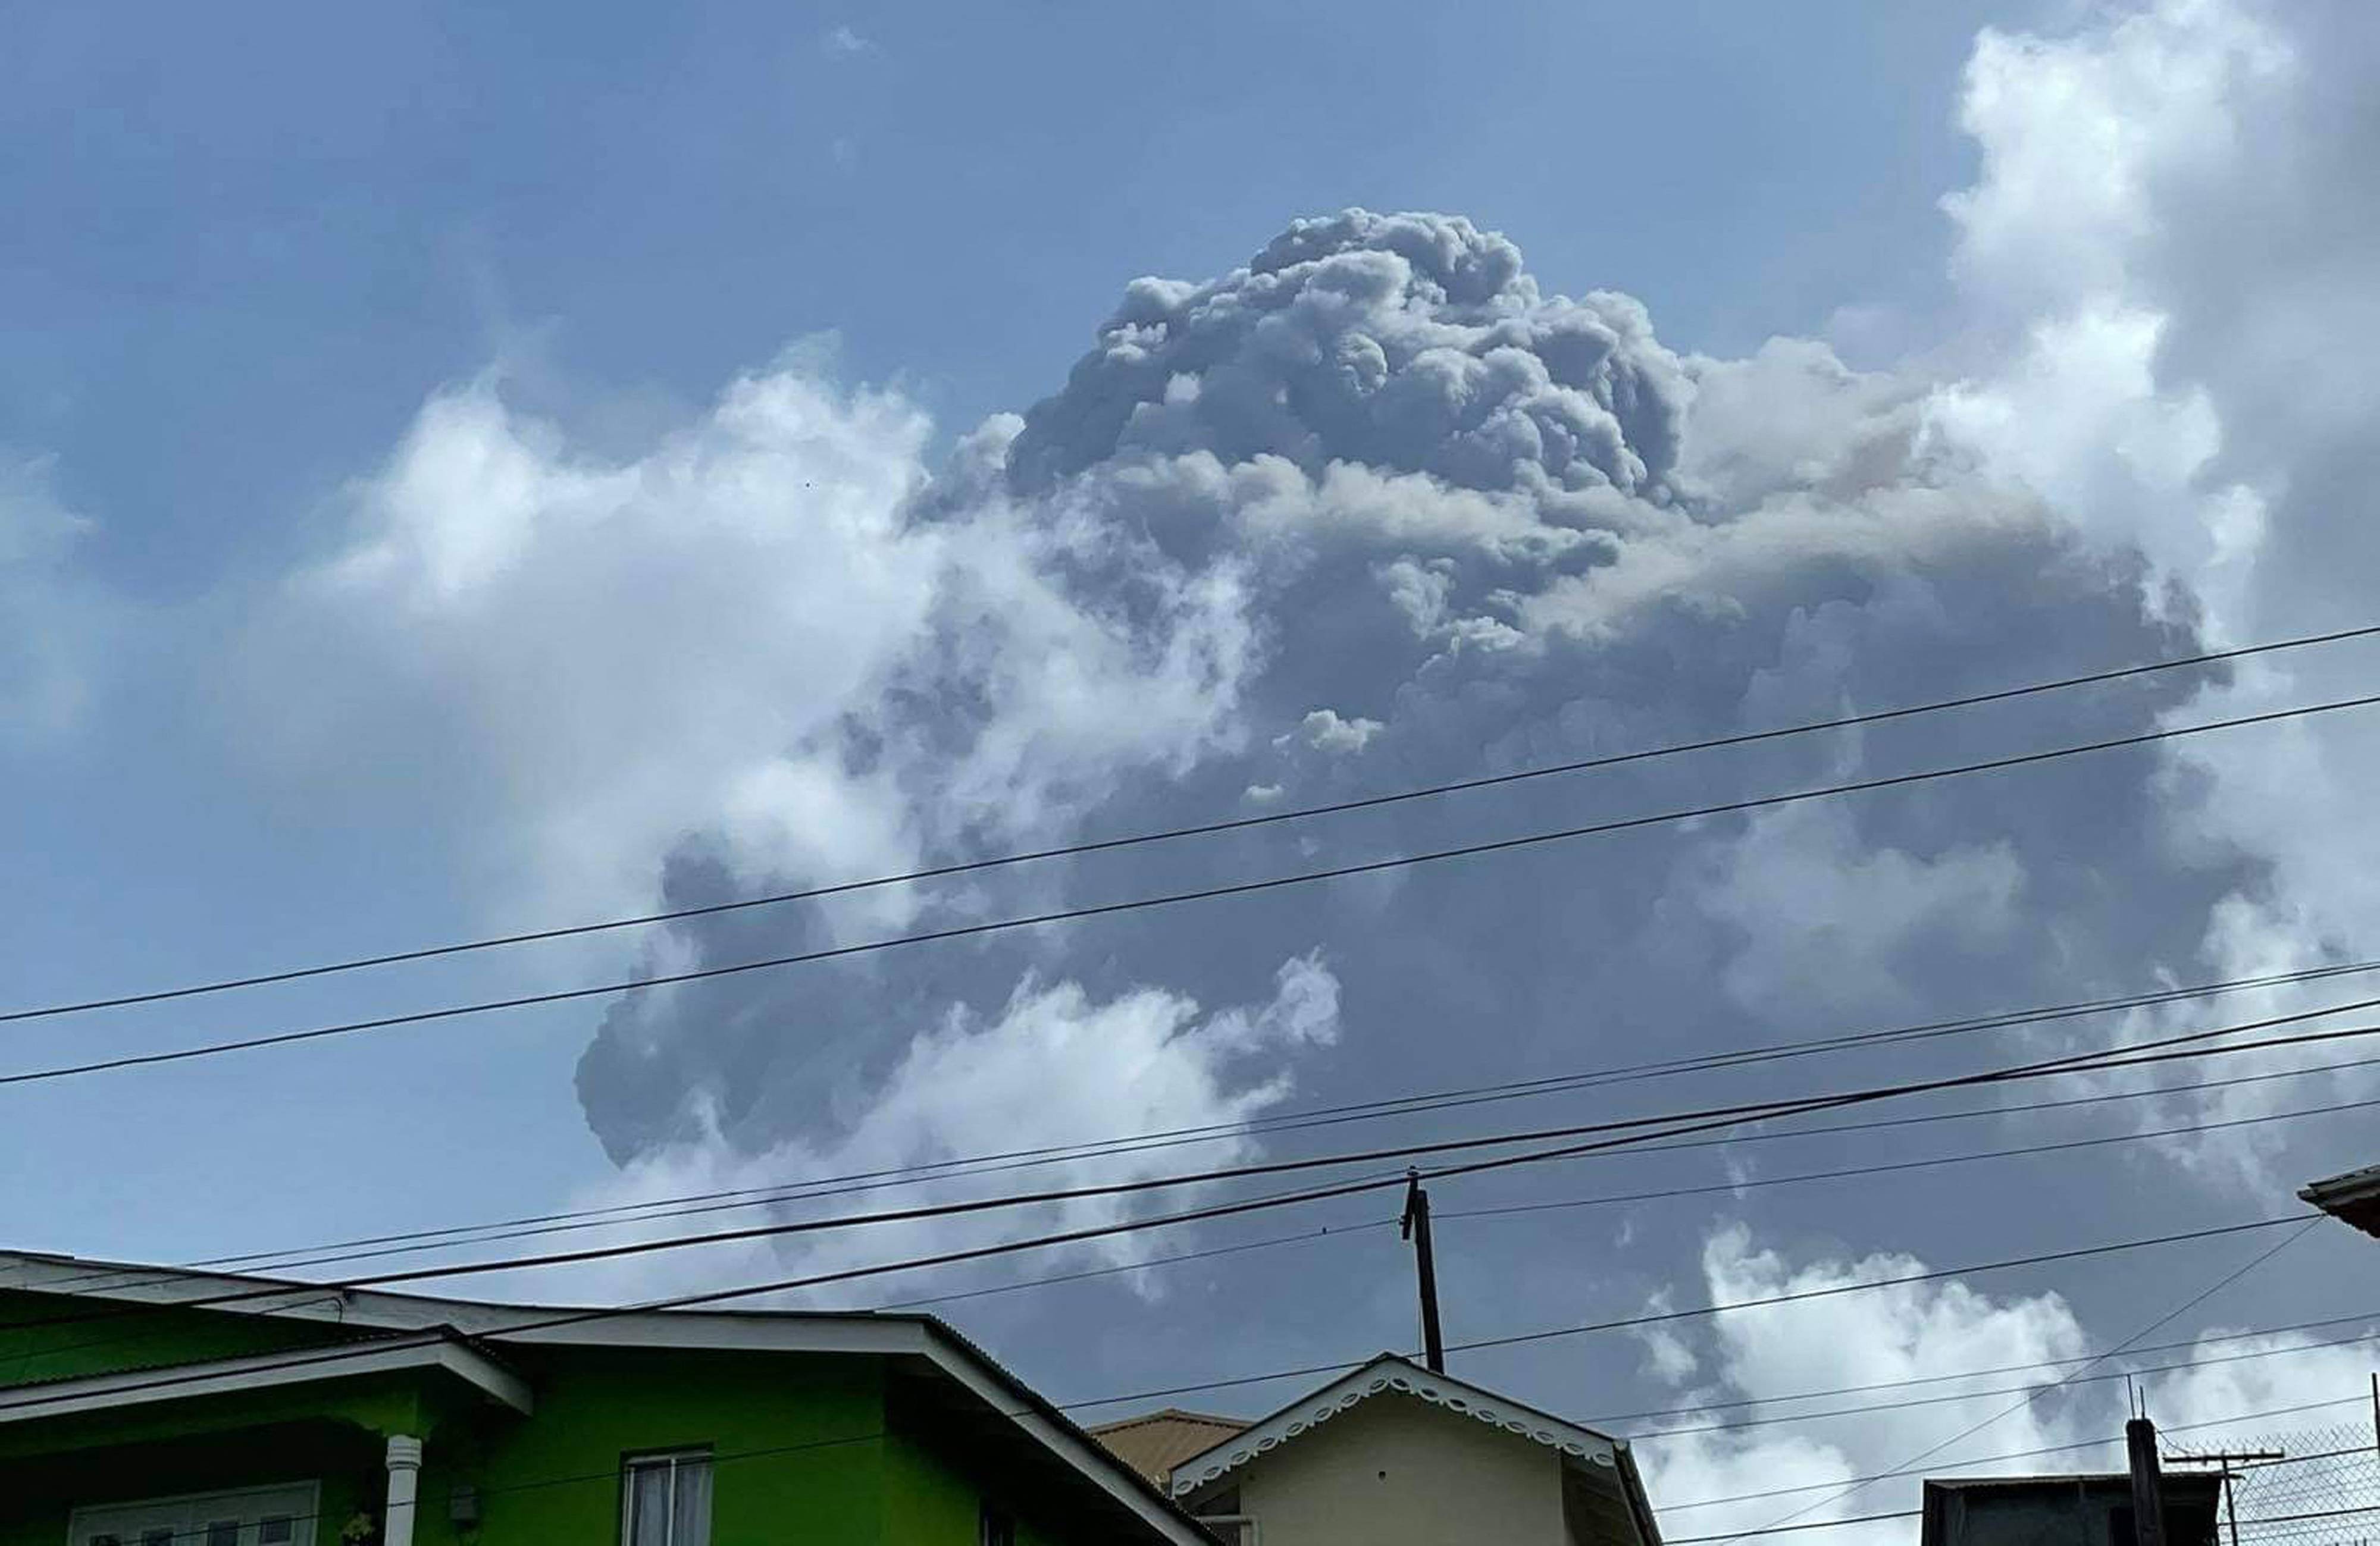 TOPSHOT - This April 9, 2021, image courtesy Zen Punnett shows the eruption of La Soufriere Volcano from Rillan Hill in Saint Vincent. - La Soufriere erupted Friday for the first time in 40 years on the Caribbean island of Saint Vincent, prompting thousands of people to evacuate, seismologists said. The blast from the volcano, sent plumes of ash 20,000 feet (6,000 meters) into the air, the local emergency management agency said. The eruption was confirmed by the UWI center. (Photo by ZEN PUNNETT / Zen Punnett / AFP) (Photo by ZEN PUNNETT/Zen Punnett/AFP via Getty Images)